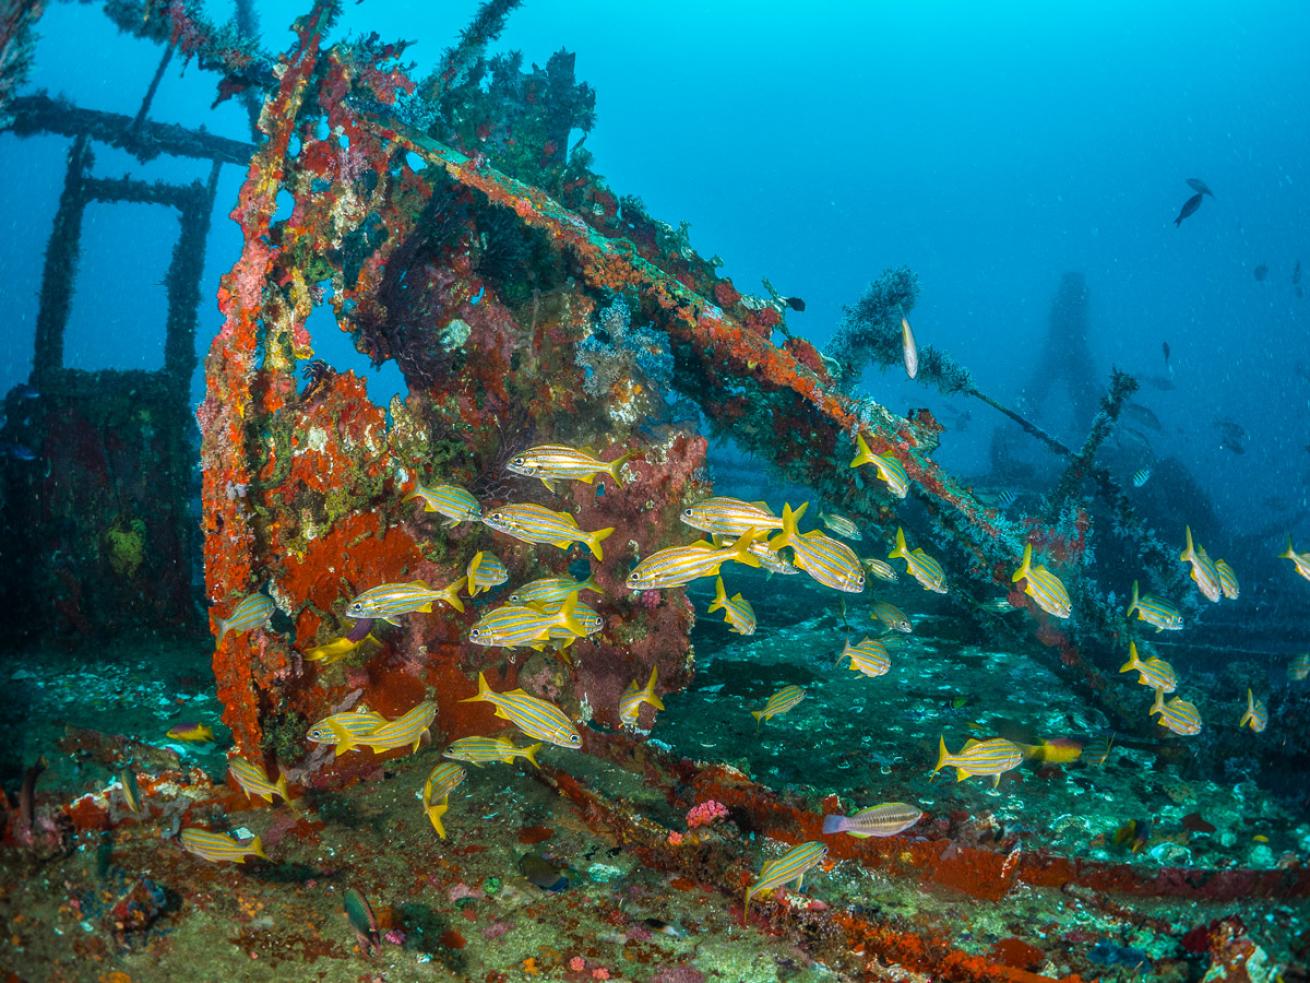 The purpose-sunk wreck of the Maverick, a 168-foot-long cargo ferry, stands out as a fish magnet on Tobago’s southern end.